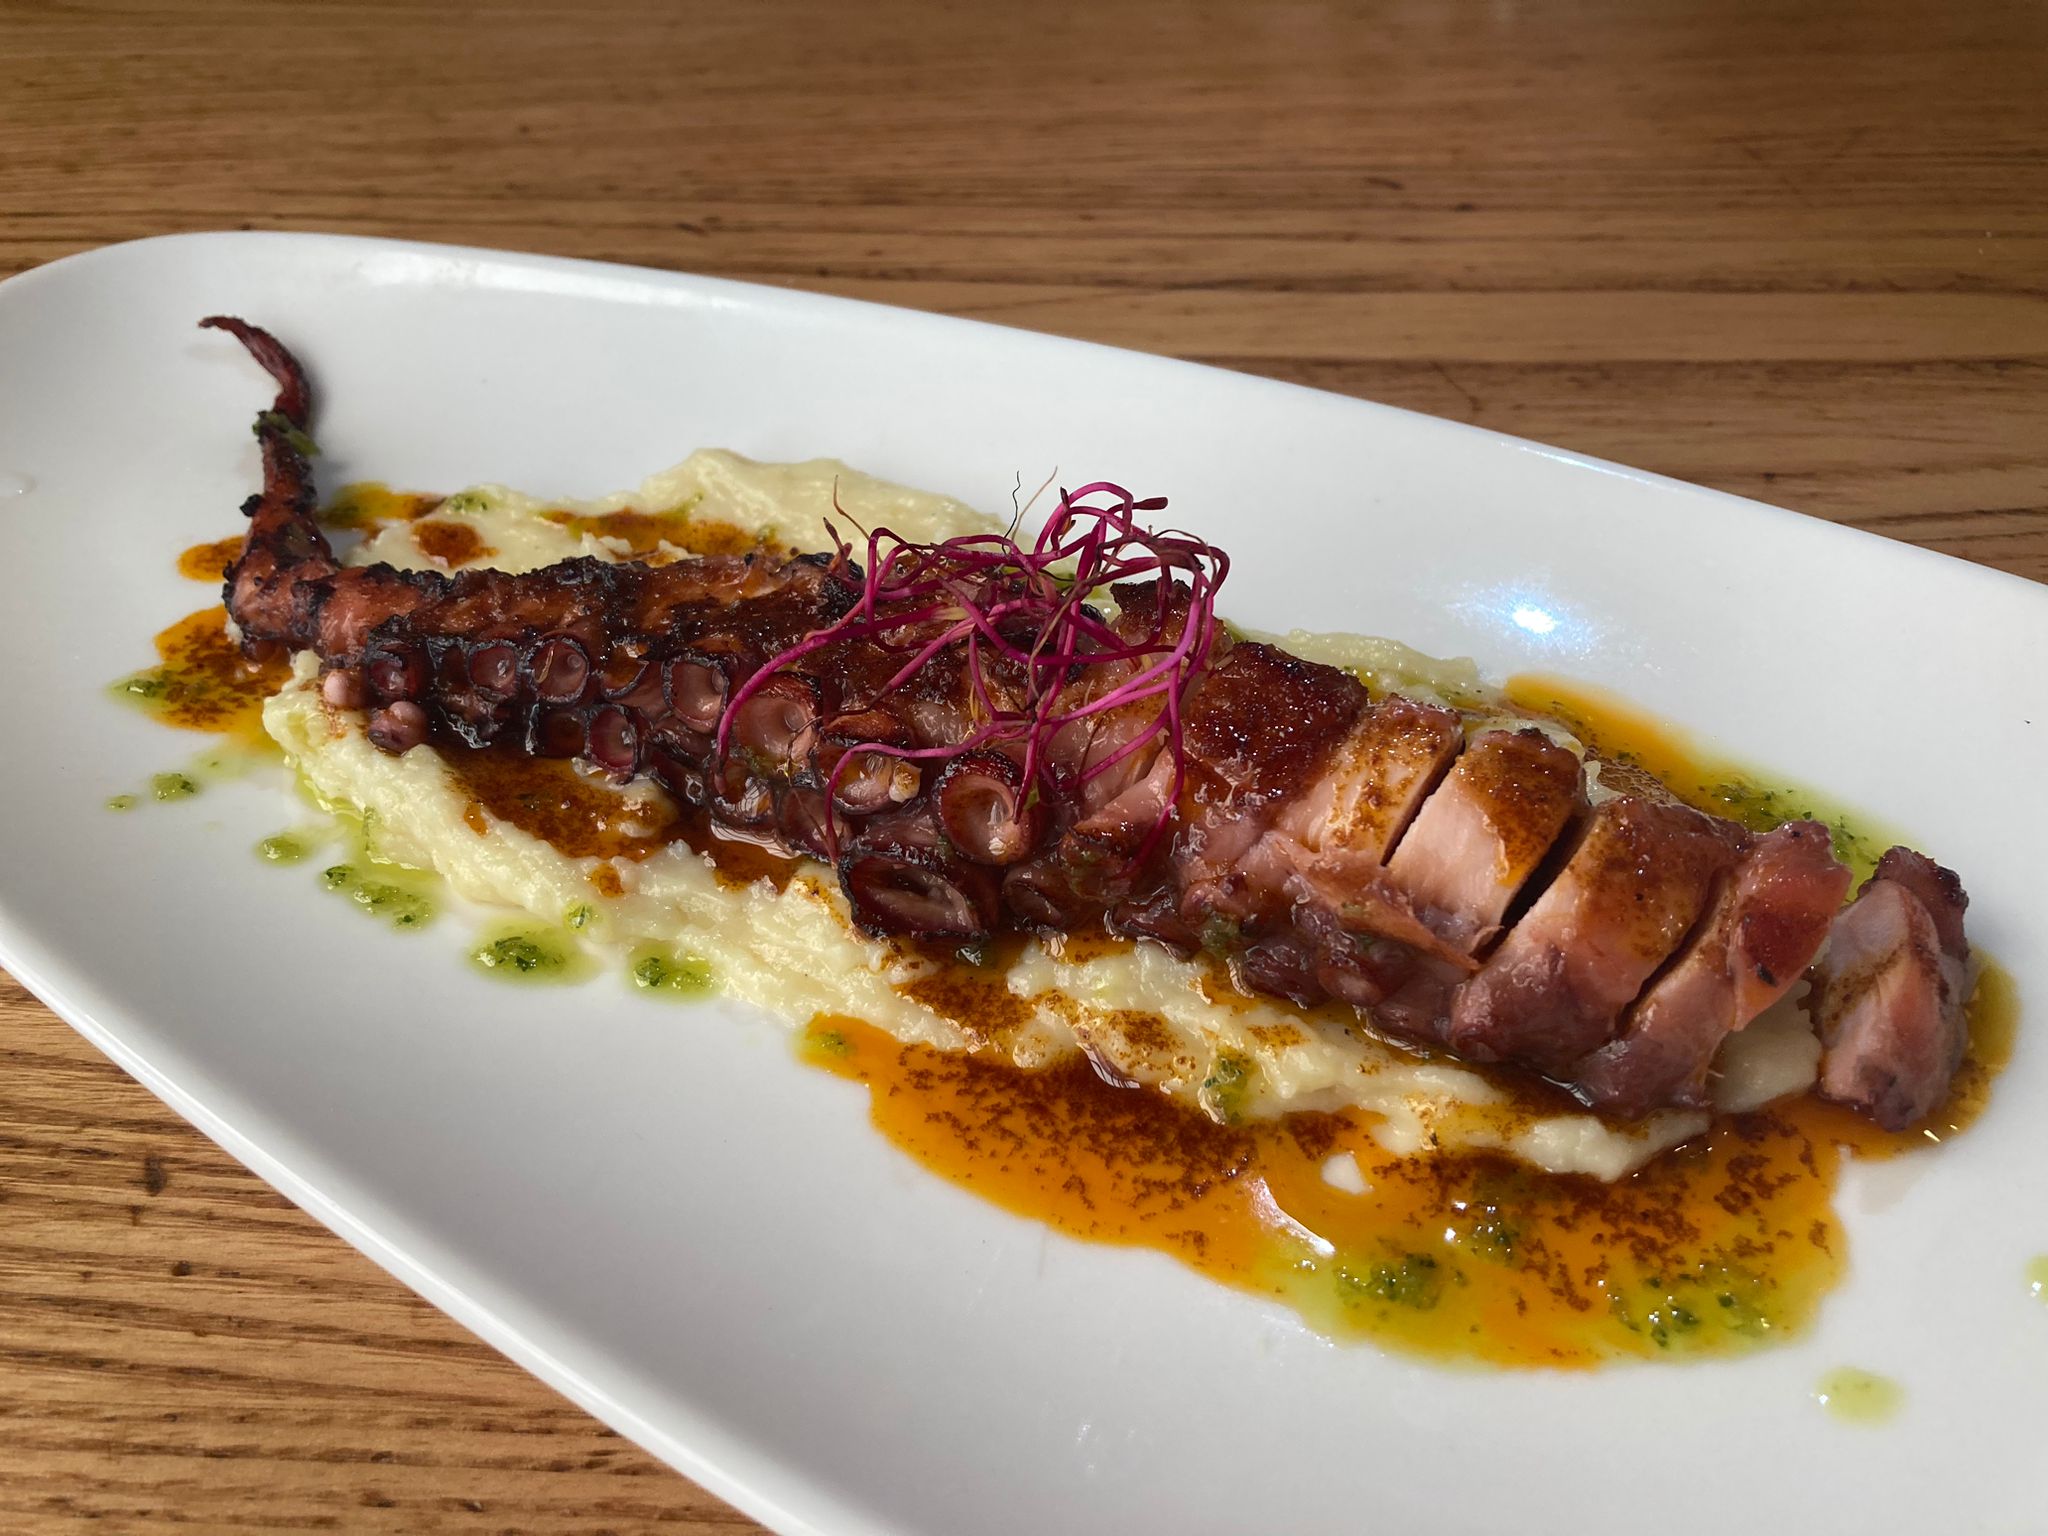 Grilled octopus with mashed potatoes